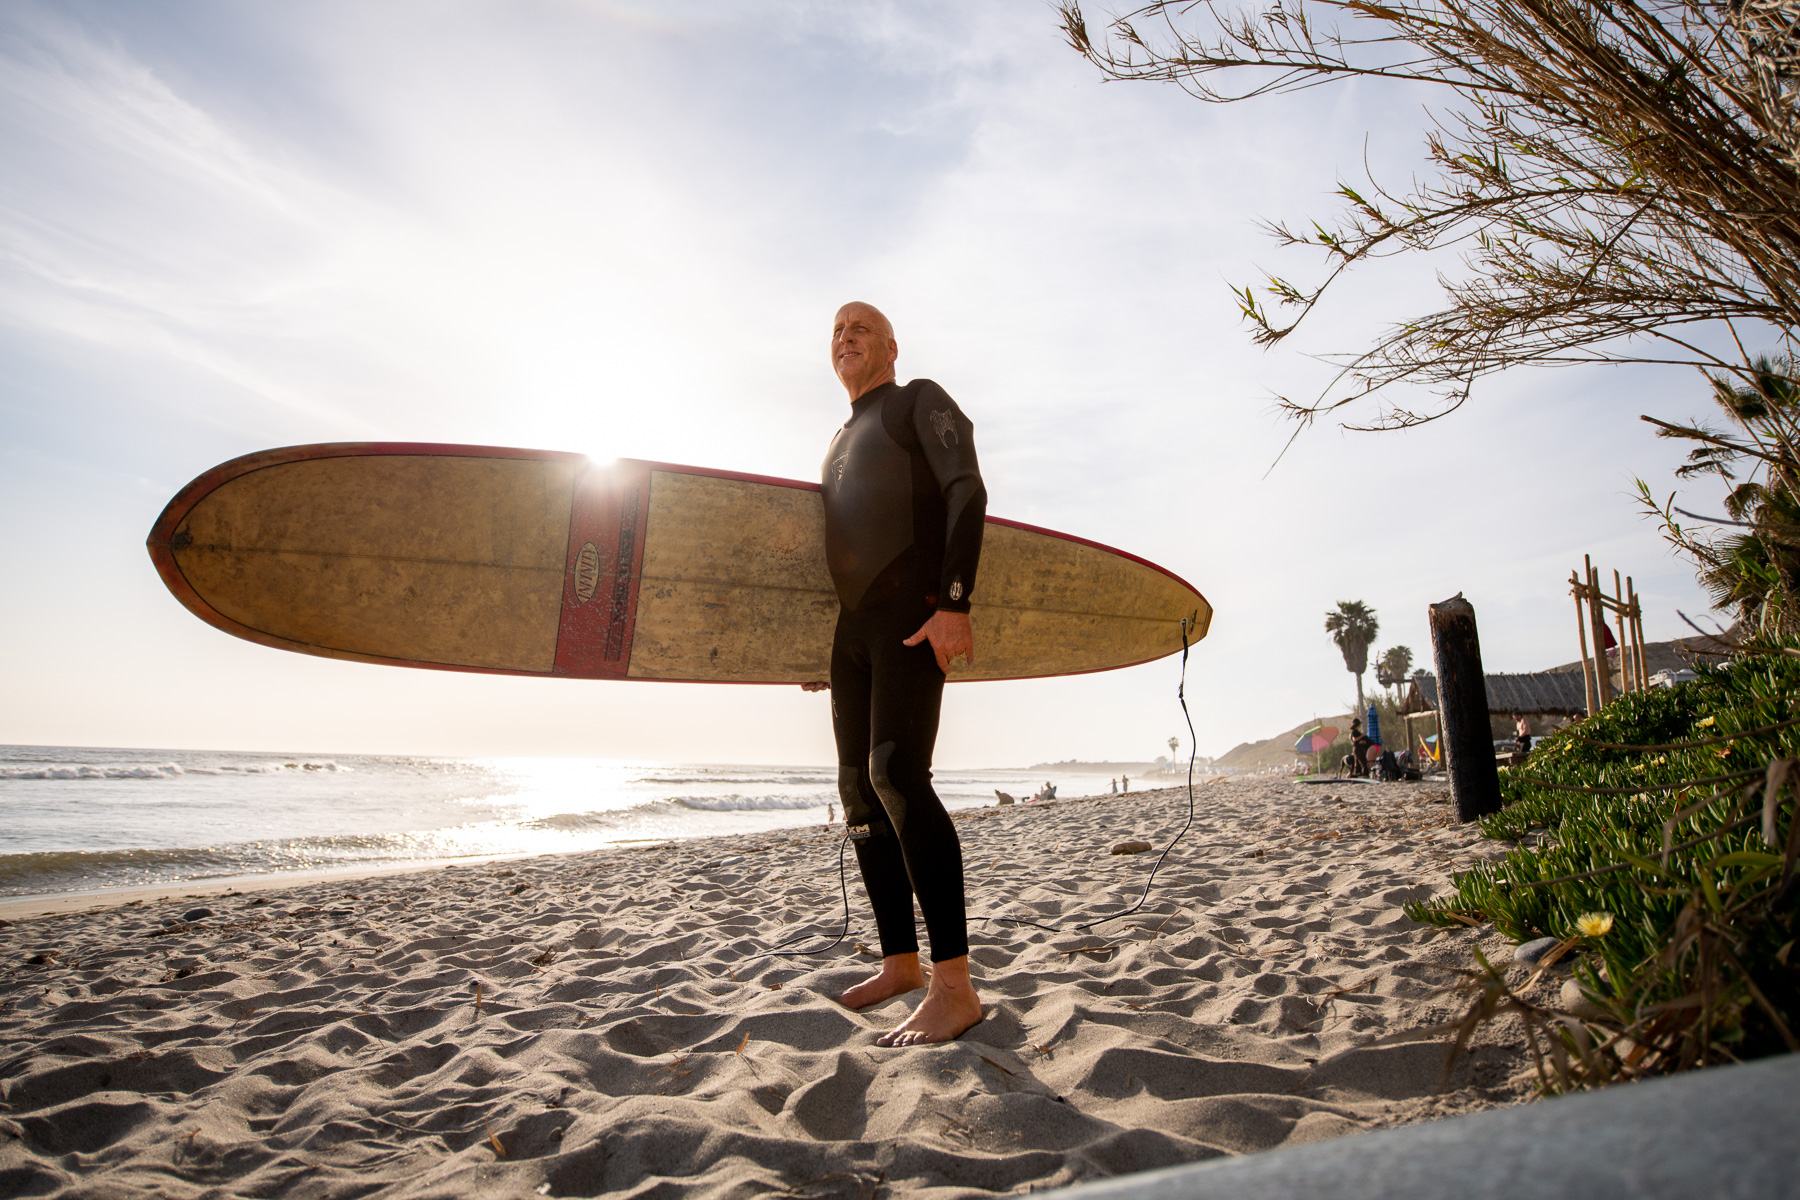 Senior surfer stands with longboard on beach